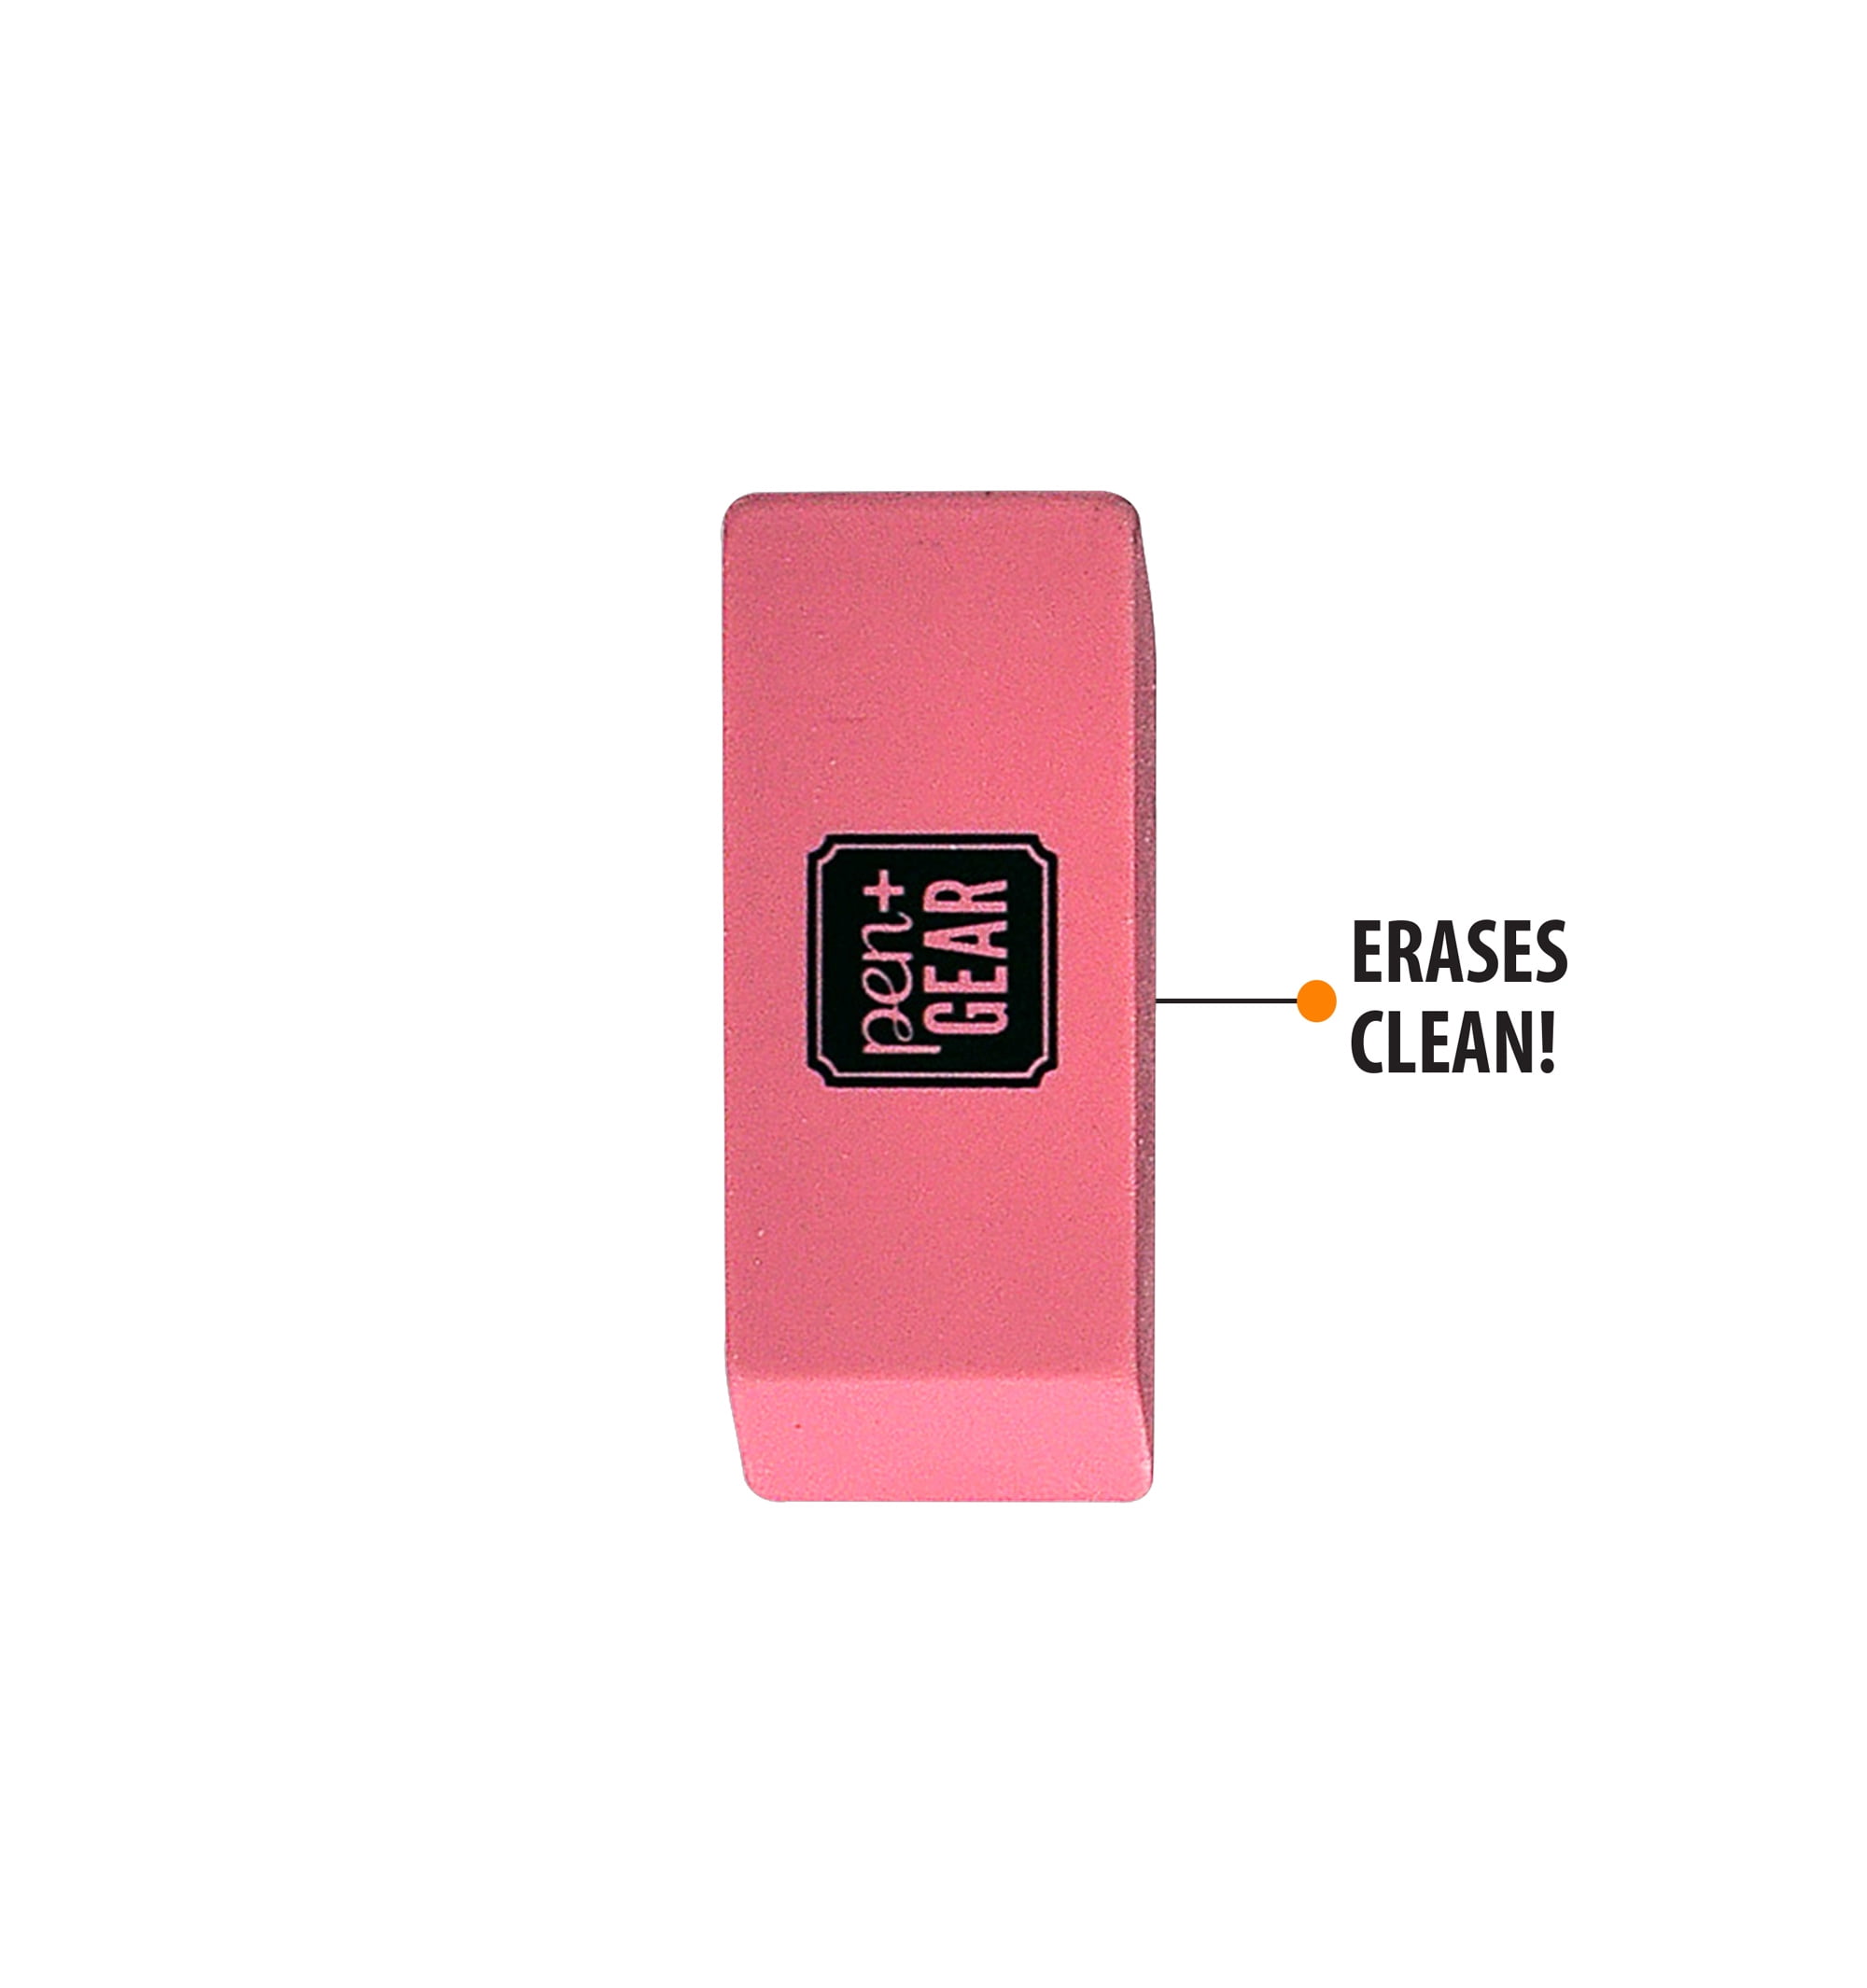 PEN+GEAR Smudge-Proof Pink Erasers 2 Count 